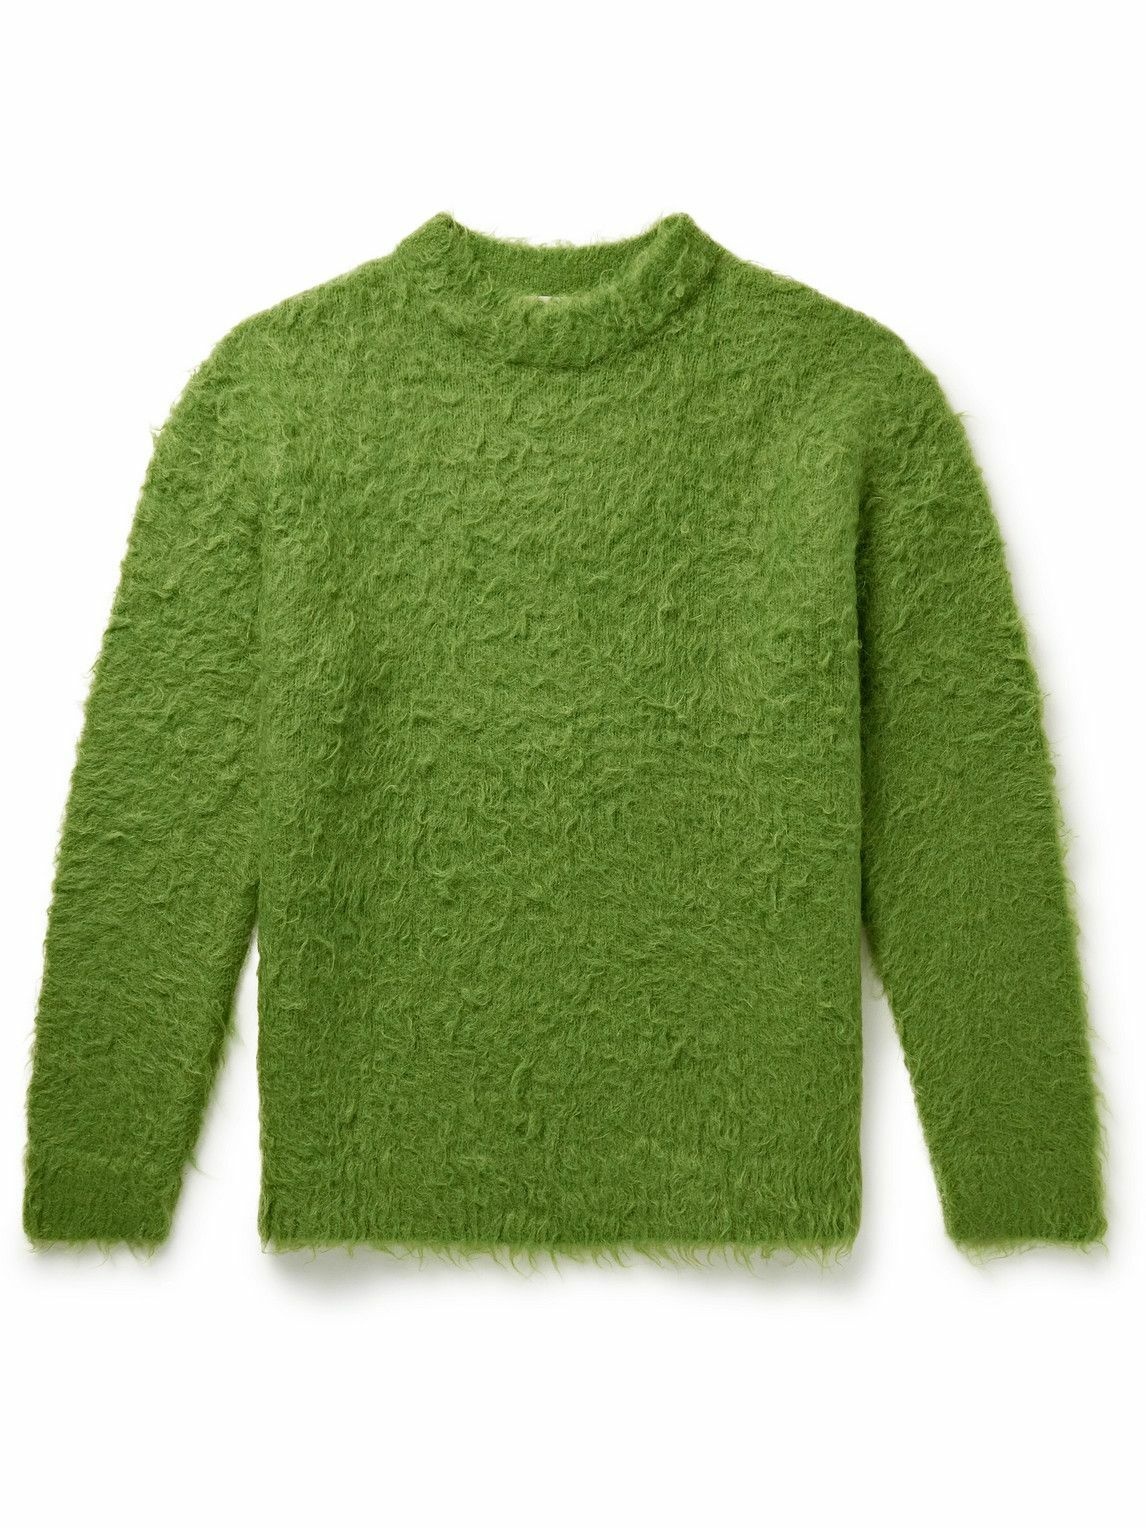 Acne Studios - Brushed-Knit Sweater - Green Acne Studios